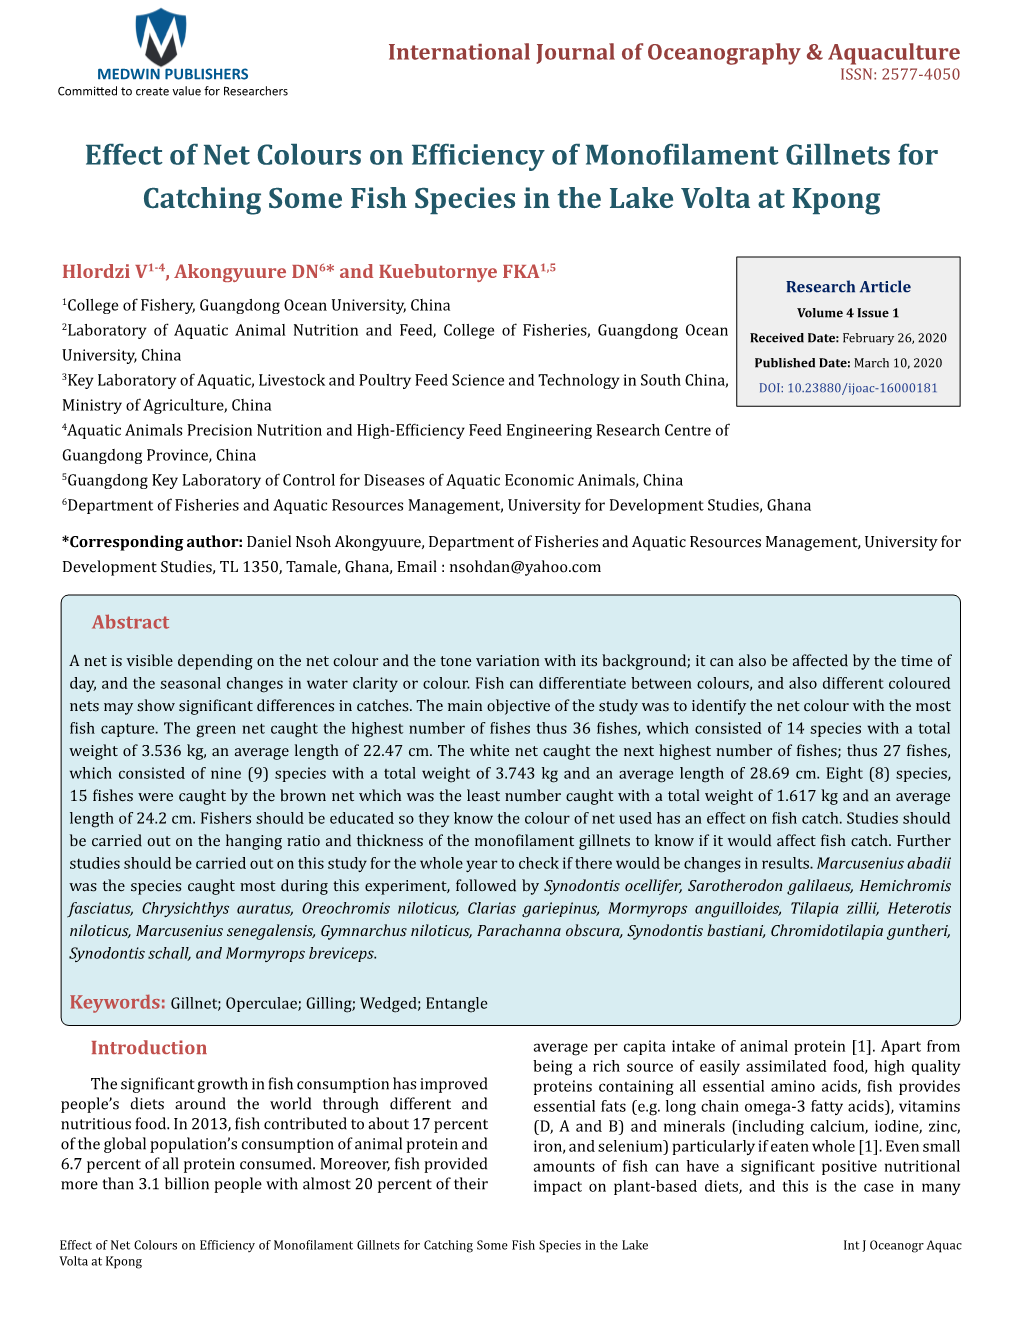 Effect of Net Colours on Efficiency of Monofilament Gillnets for Catching Some Fish Species in the Lake Volta at Kpong